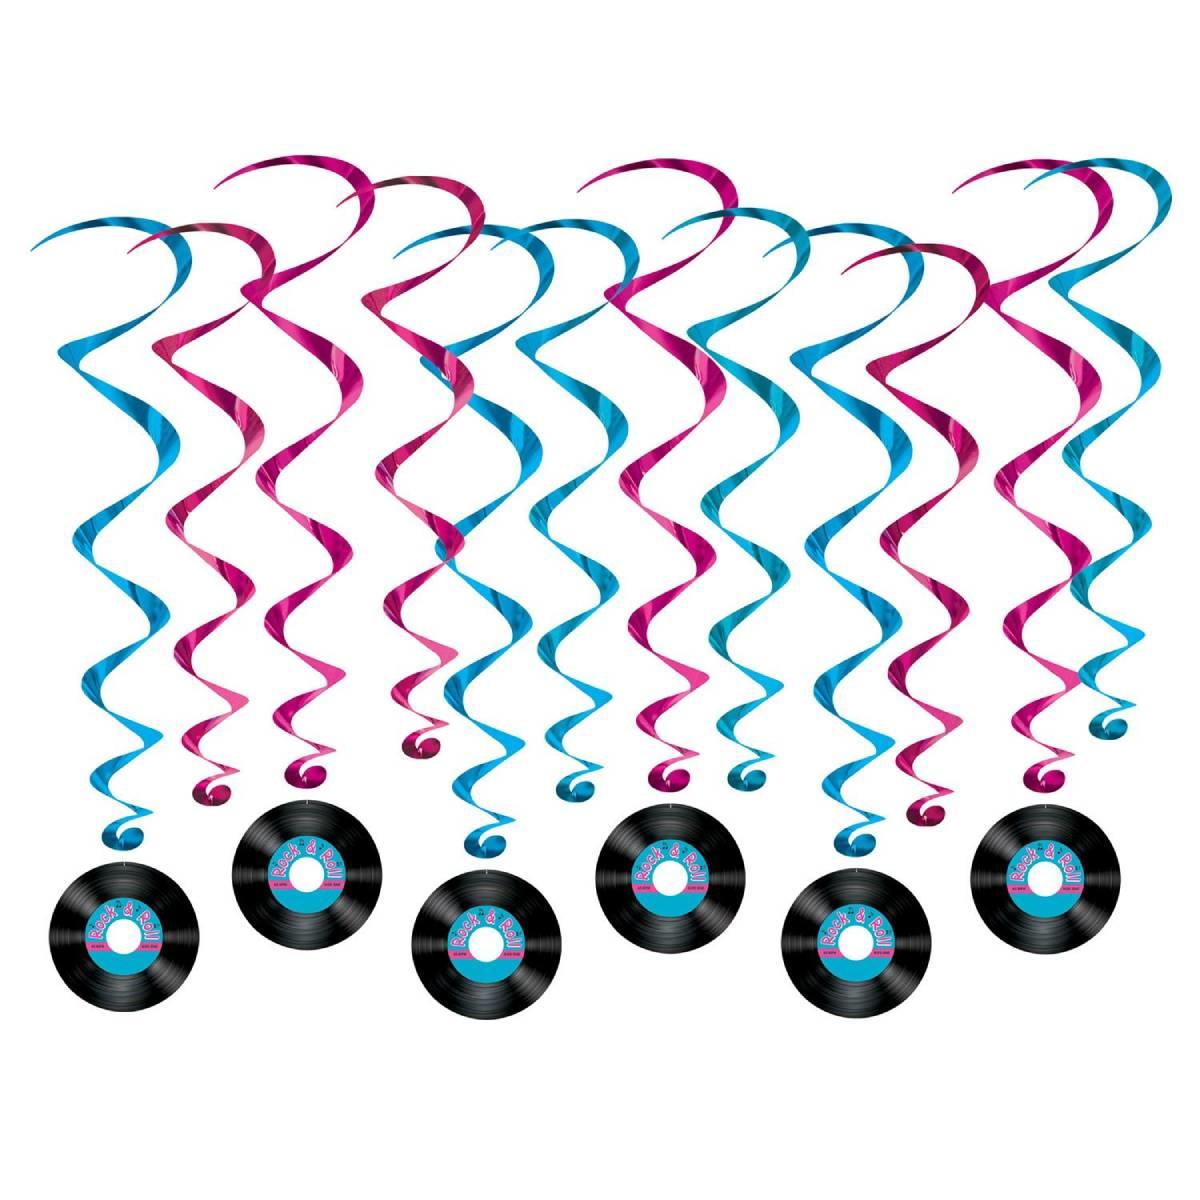 Rock and Roll Records 12pc Whirl Decoration Pack by Beistle 53470 available here at Karnival Costumes online party shop